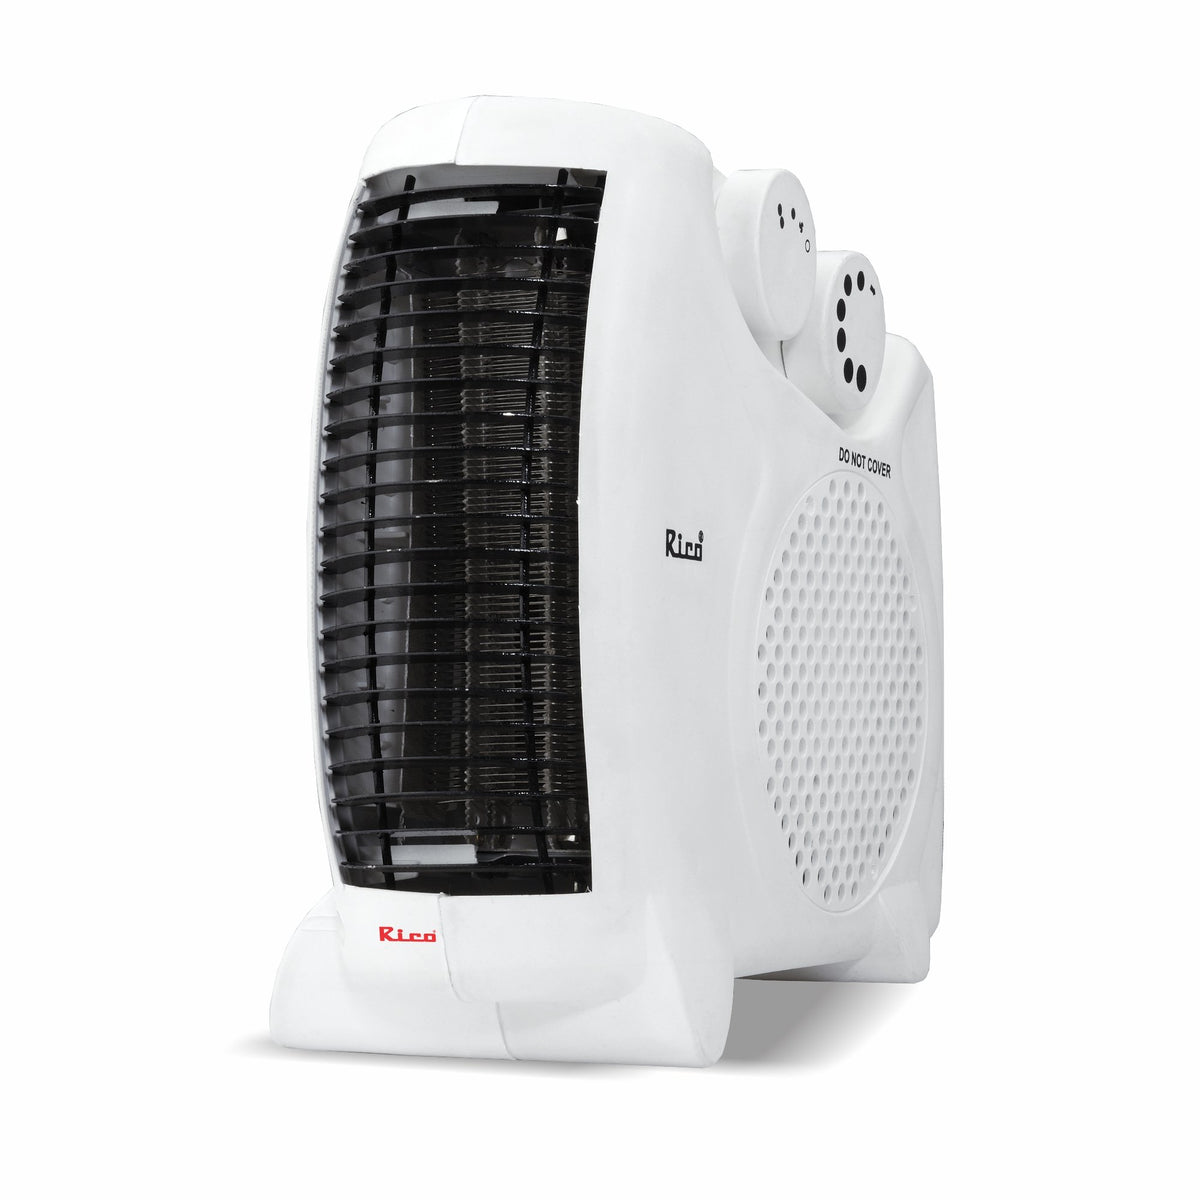 Stainless Steel 2000W Resco Room Heater at Rs 550 in New Delhi